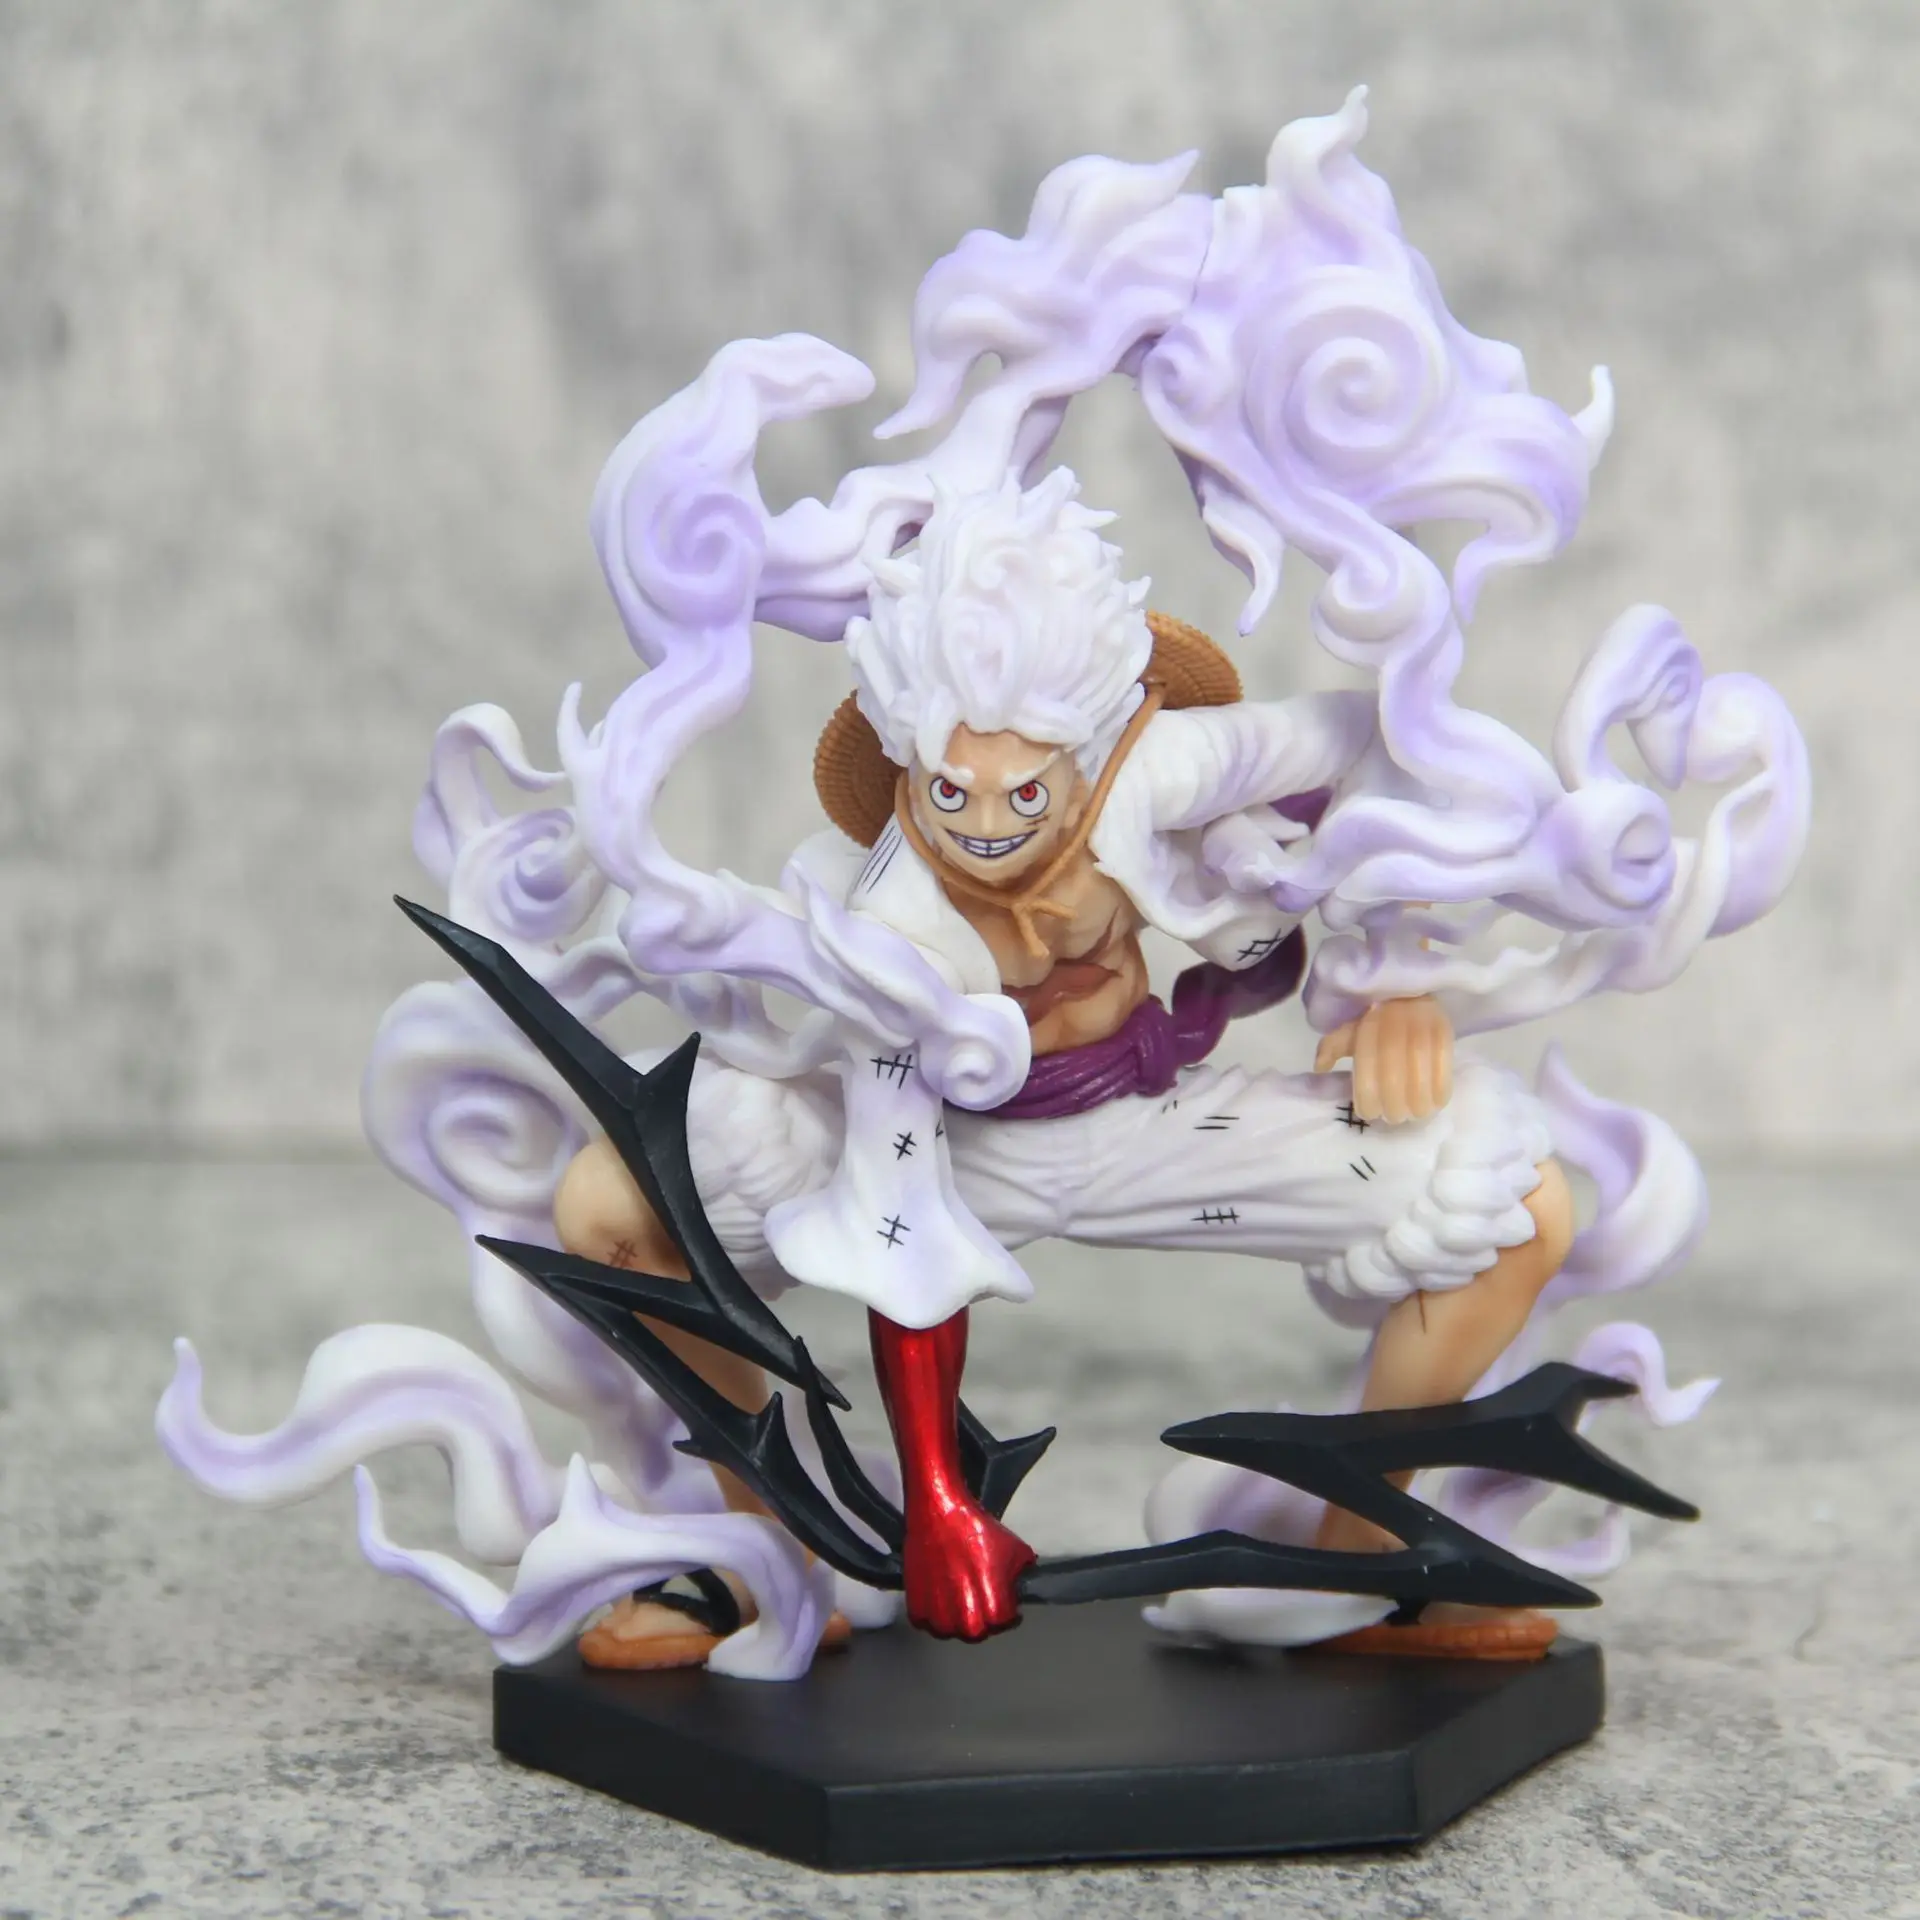 

15cm Anime One Piece Figure Sun God Nica Luffy Squatting Model Action Figure PVC Statue Figurine Collectible Doll Toys Gifts Boy